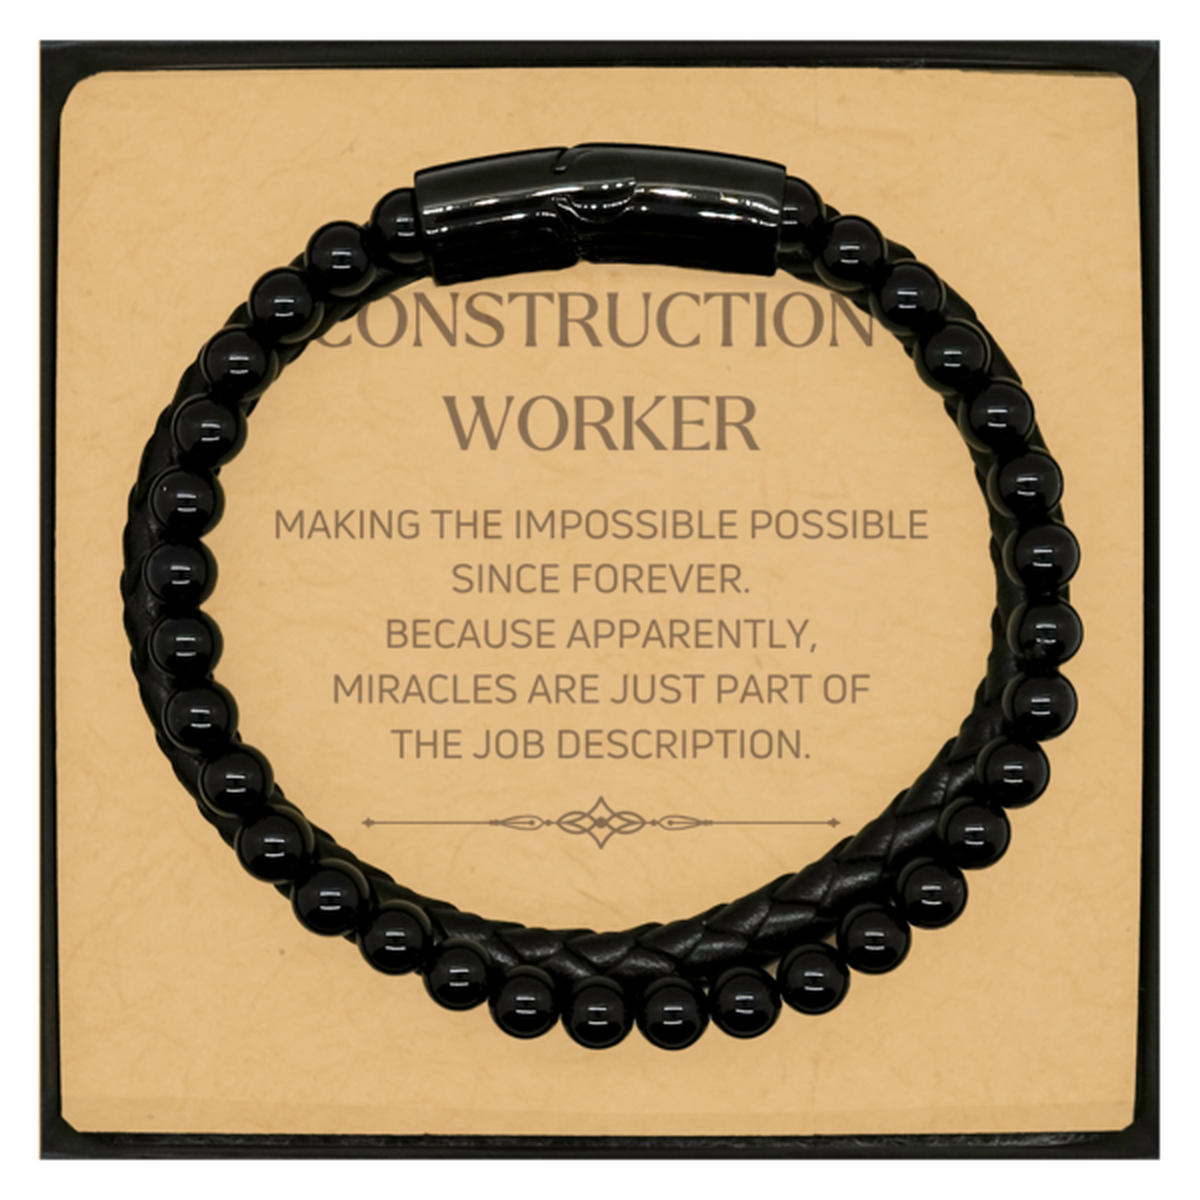 Funny Construction Worker Gifts, Miracles are just part of the job description, Inspirational Birthday Christmas Stone Leather Bracelets For Construction Worker, Men, Women, Coworkers, Friends, Boss